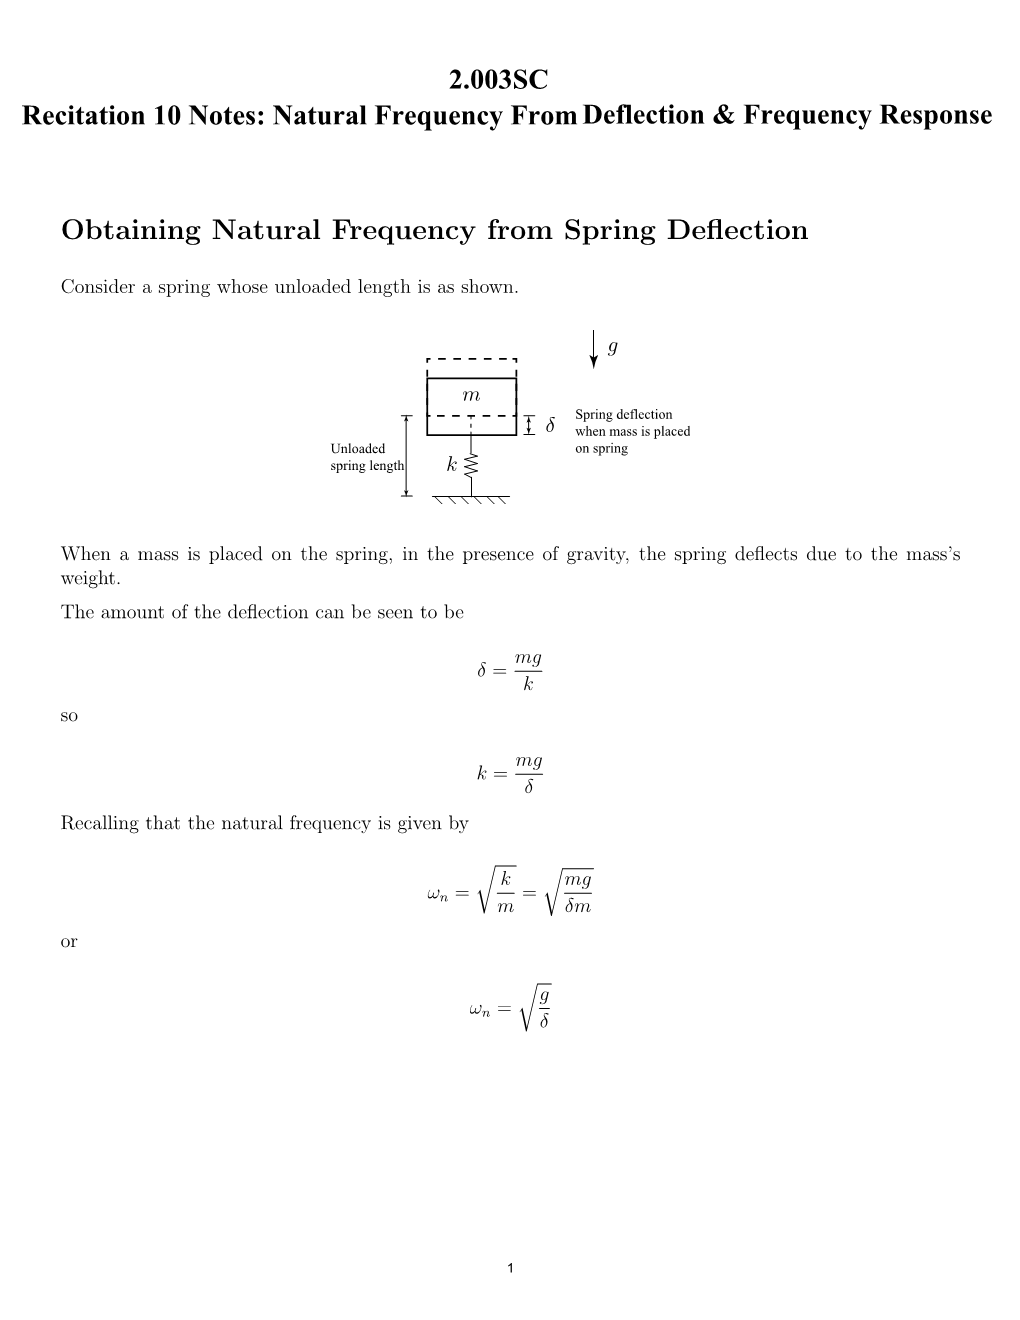 Recitation 10 Notes: Natural Frequency from Deflection & Frequency Response